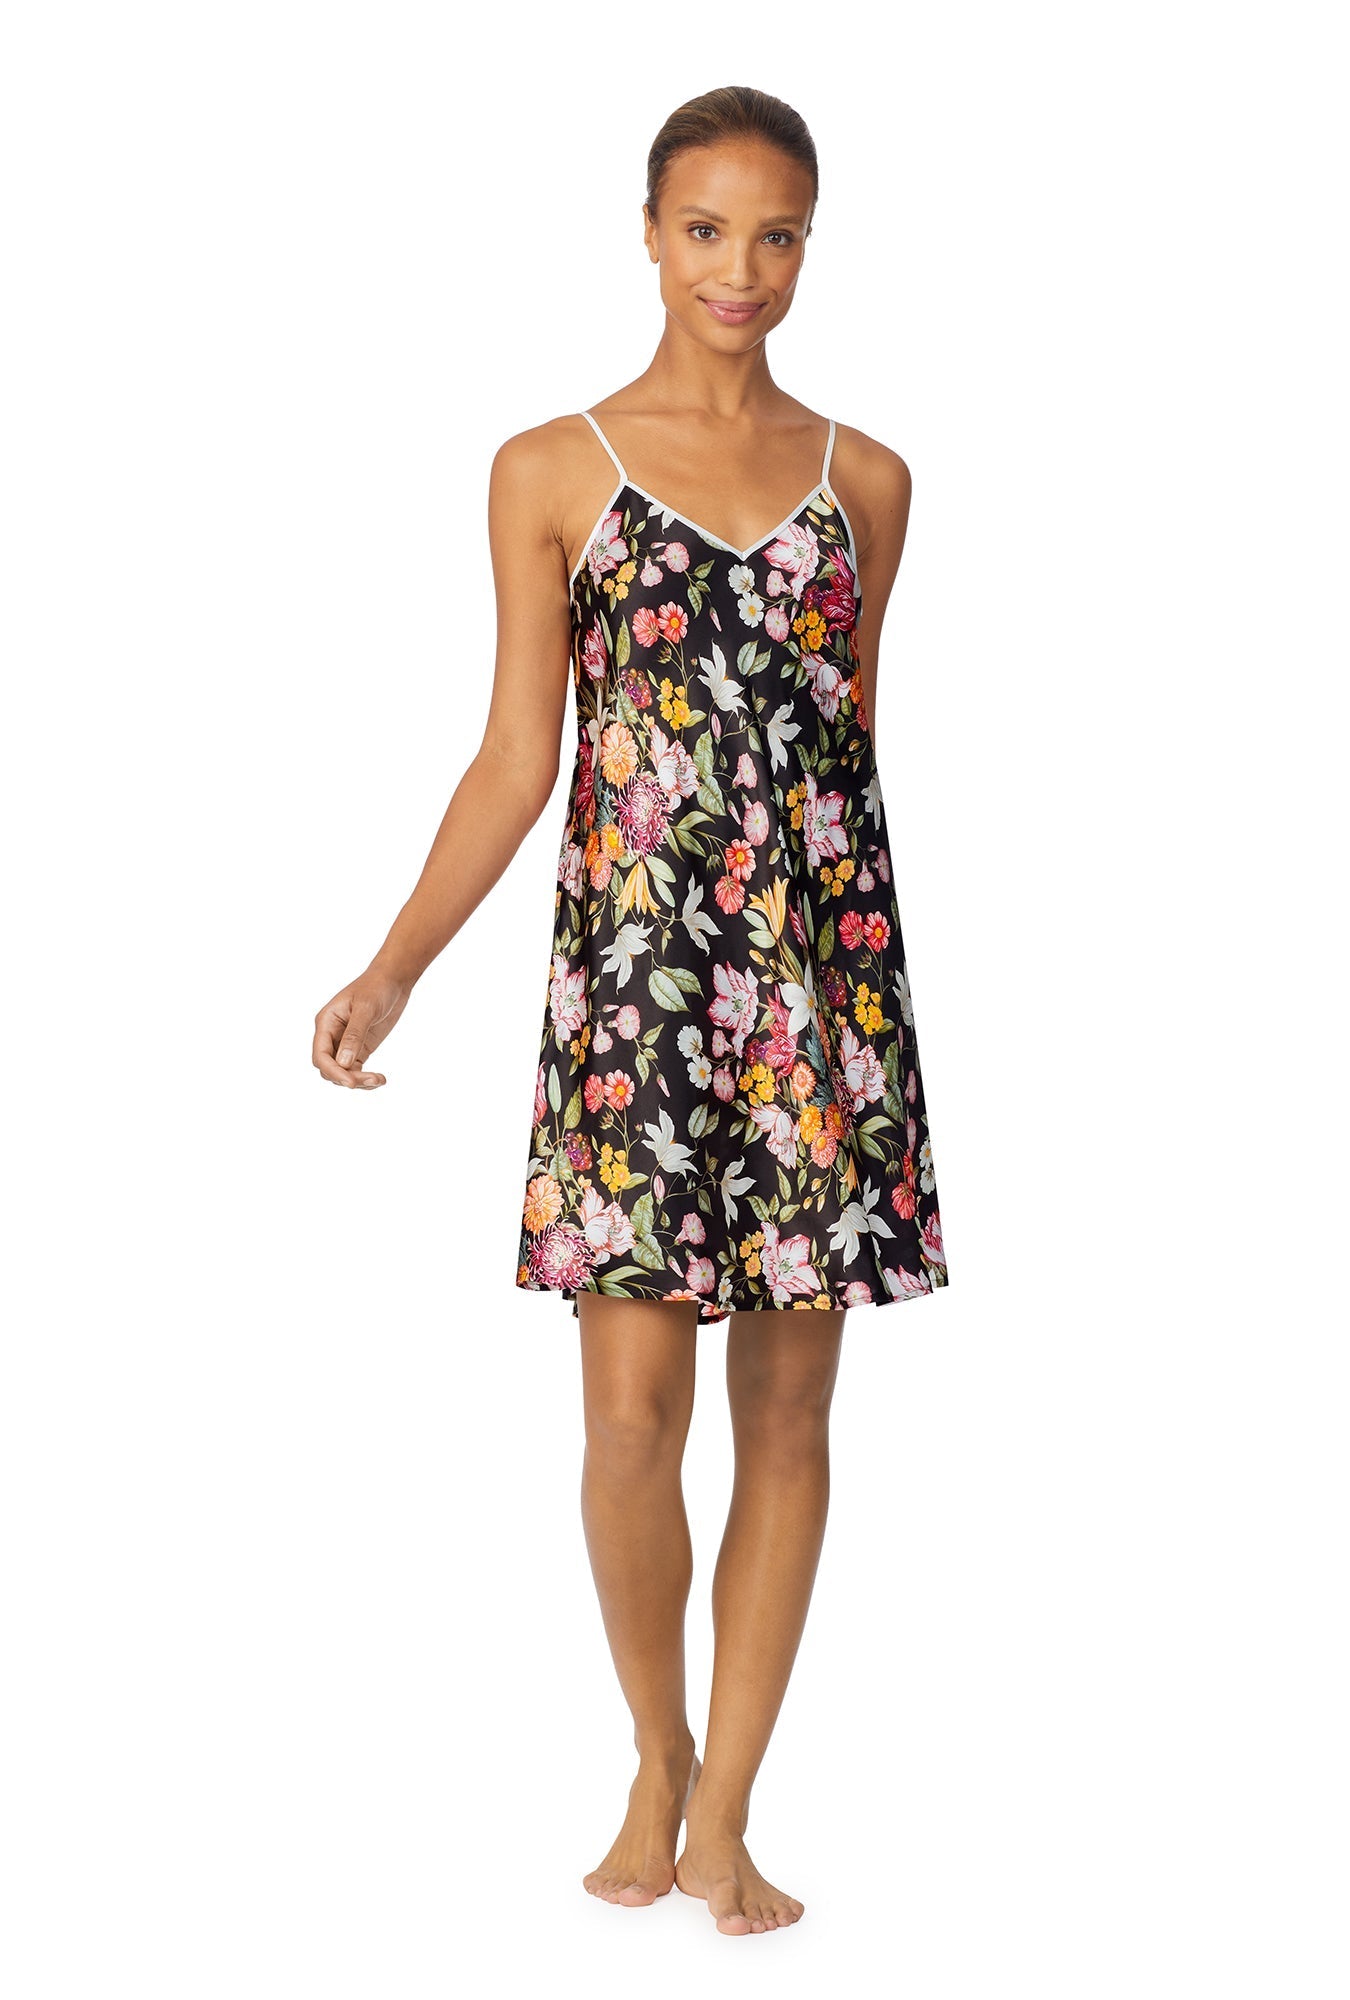 A lady wearing a black sleeveless chemise with multicolor floral pattern.